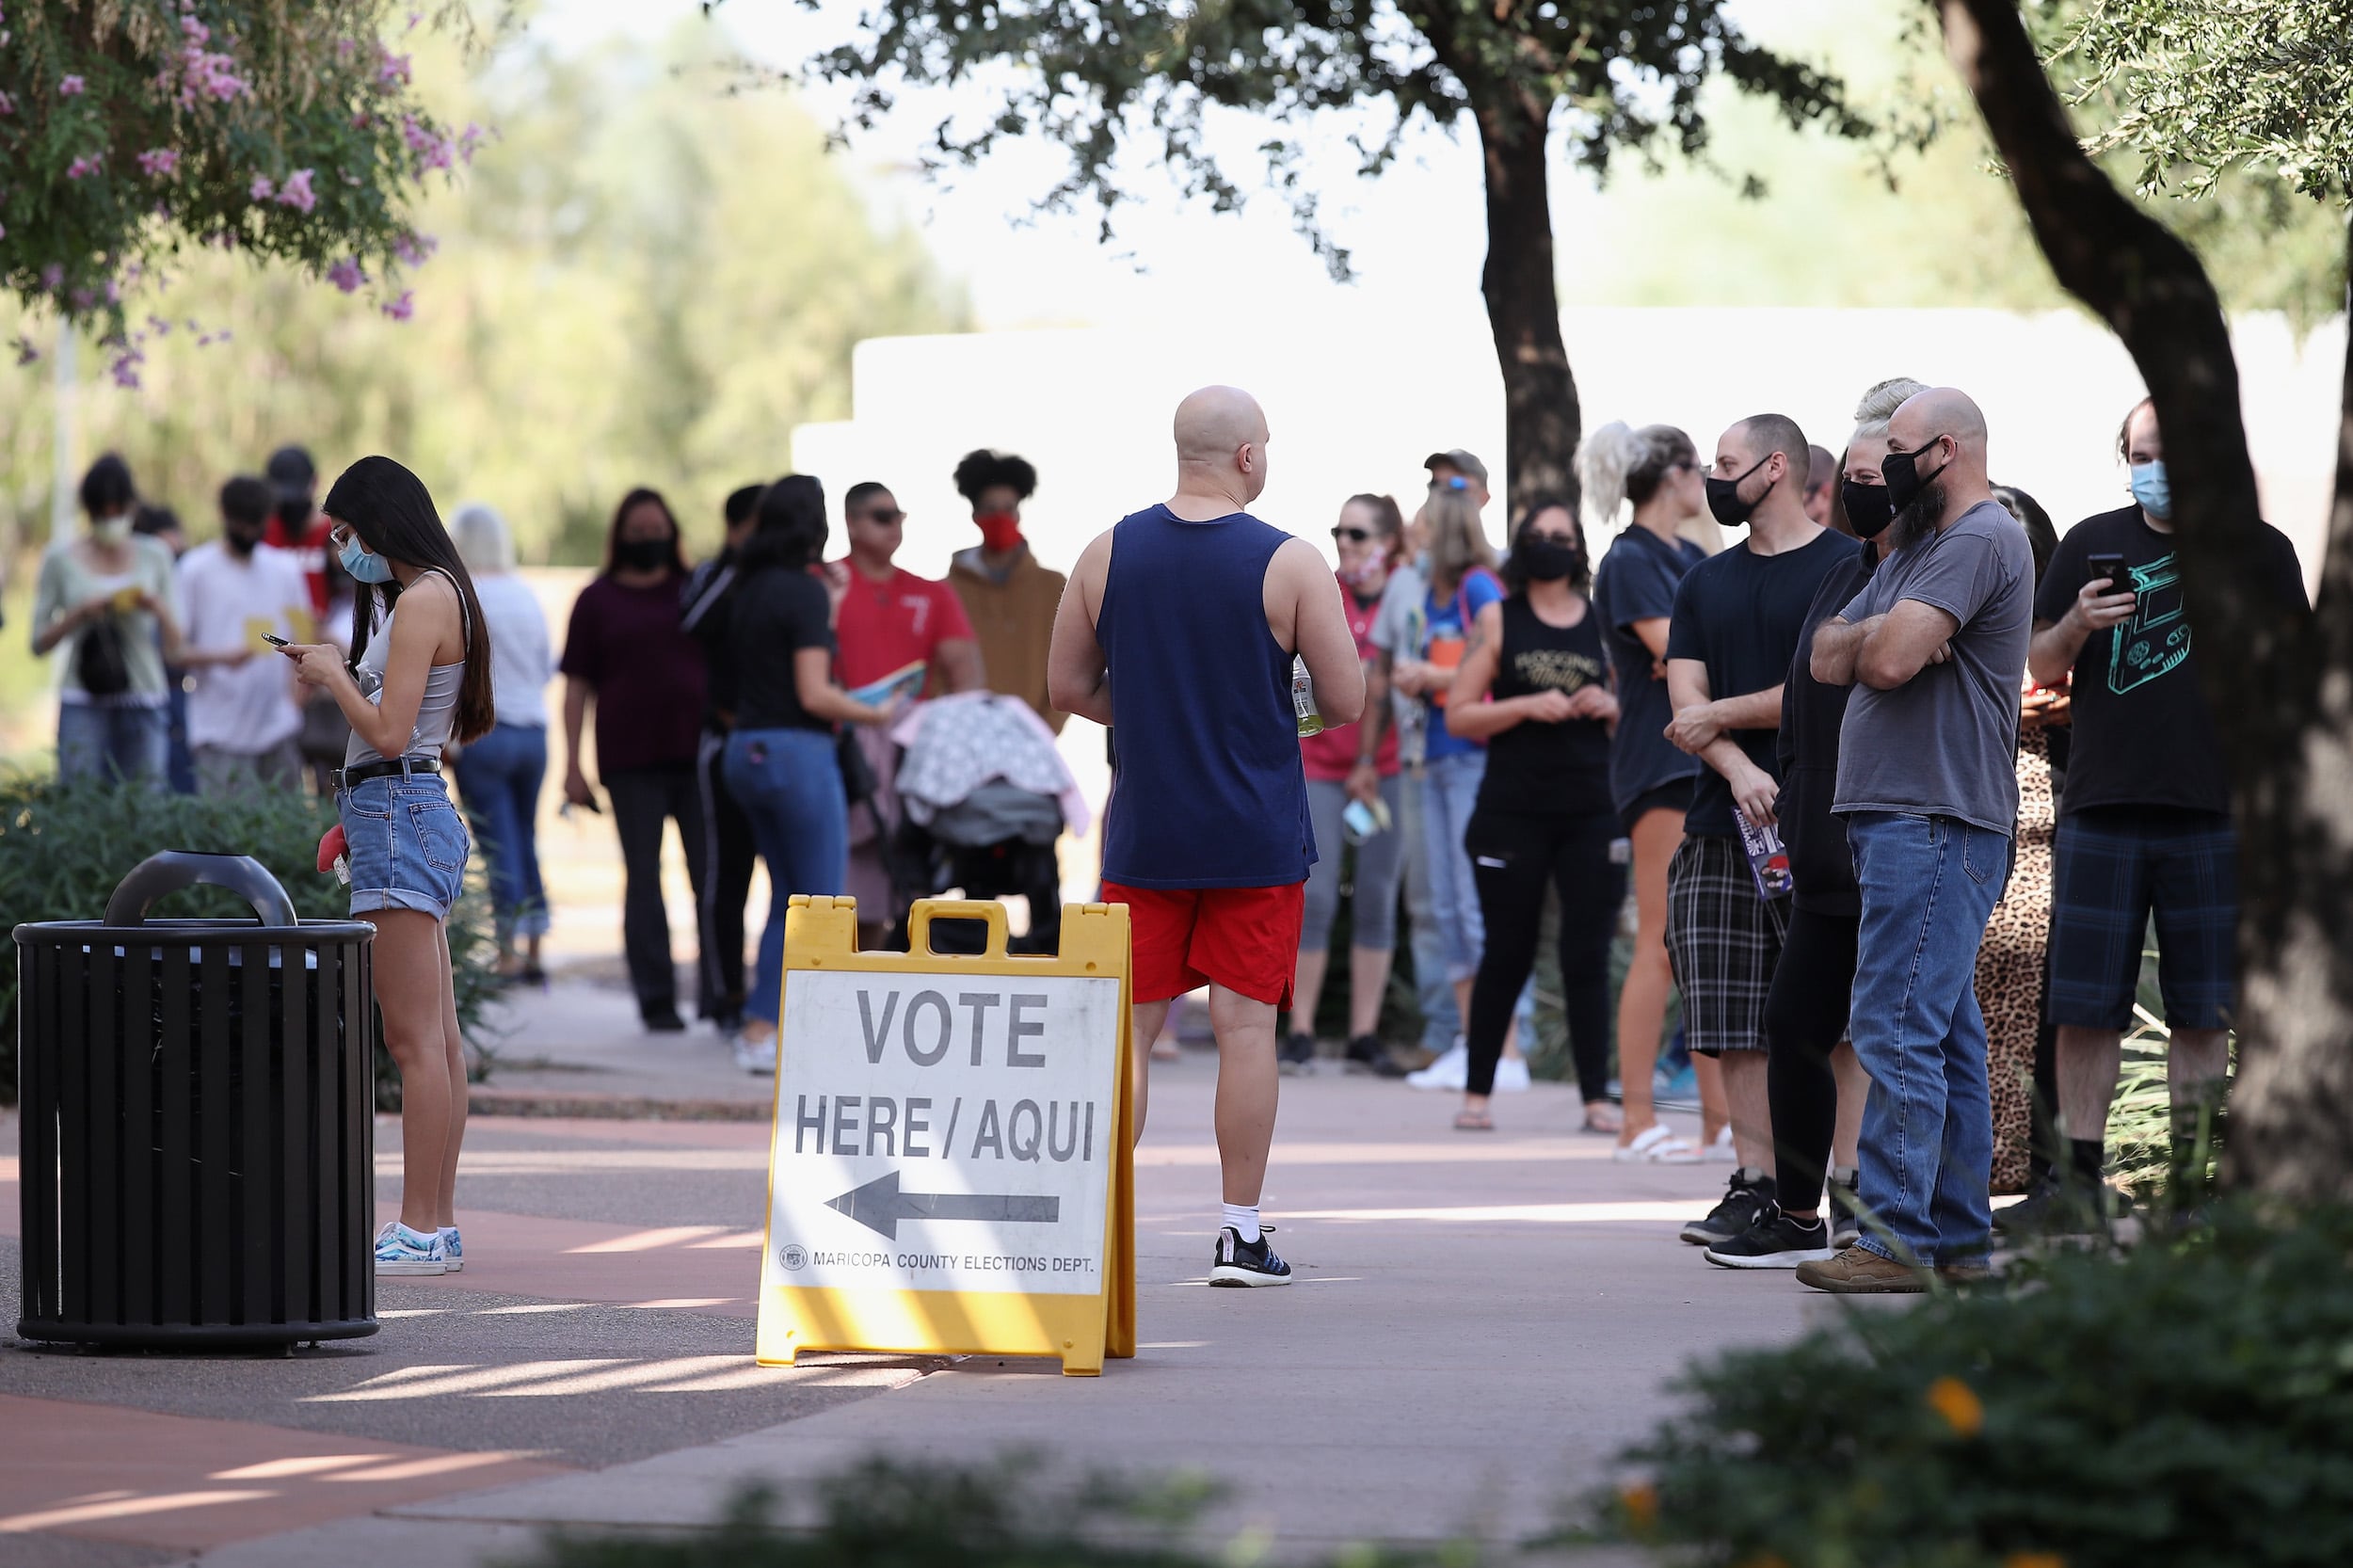 Voters wait in line at the Surprise Court House polling location on Nov. 3, 2020 in Surprise, Arizona.